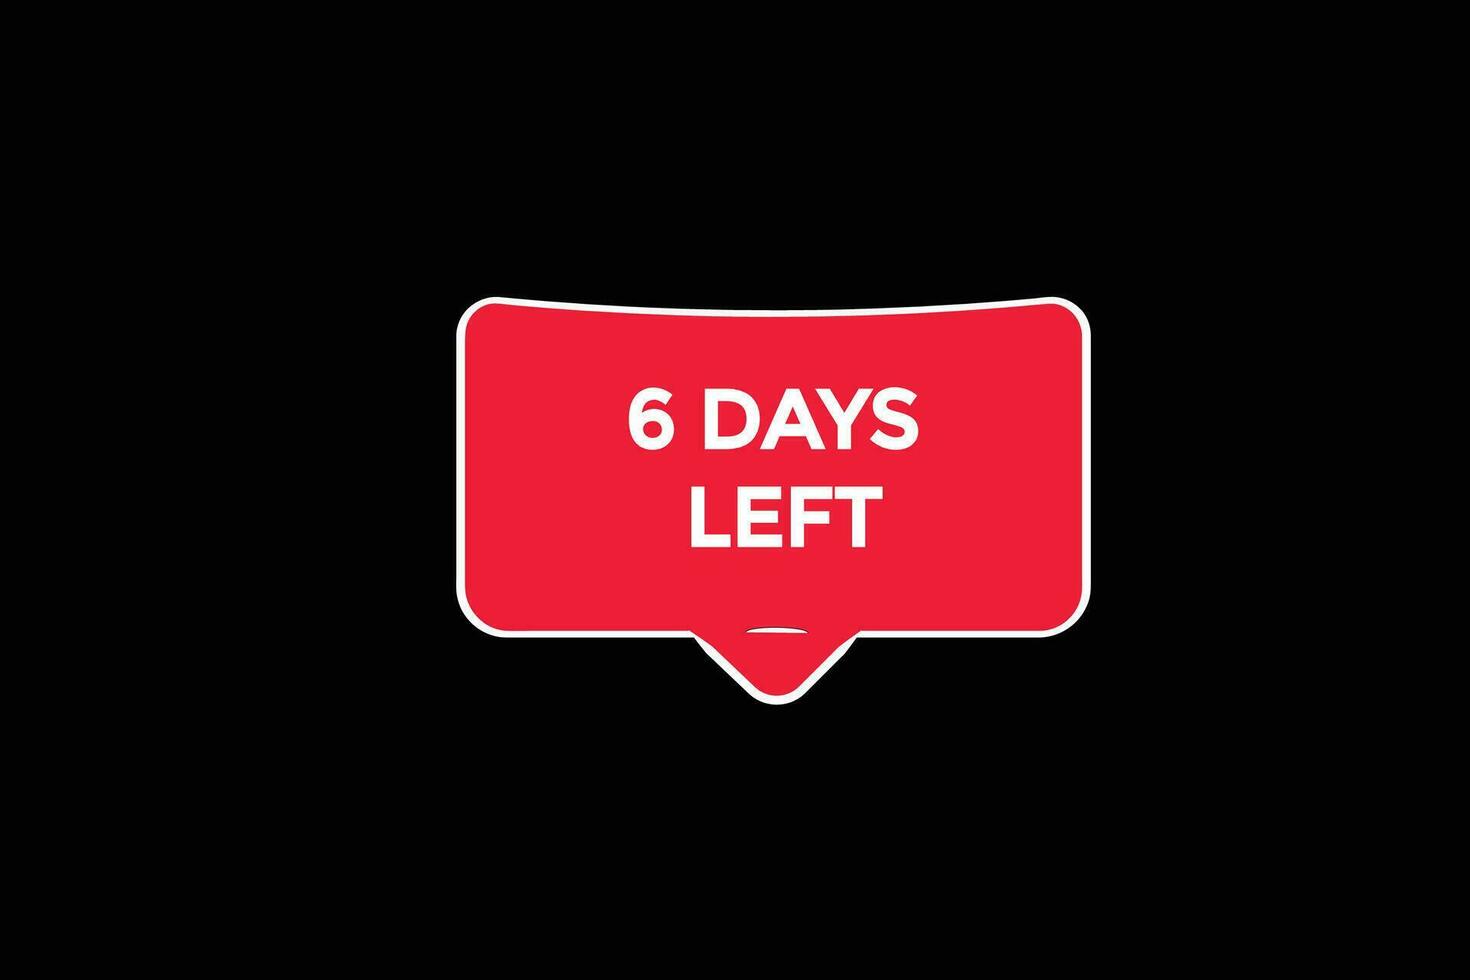 6 days, left countdown to go one time template,6 day countdown left banner label button vector